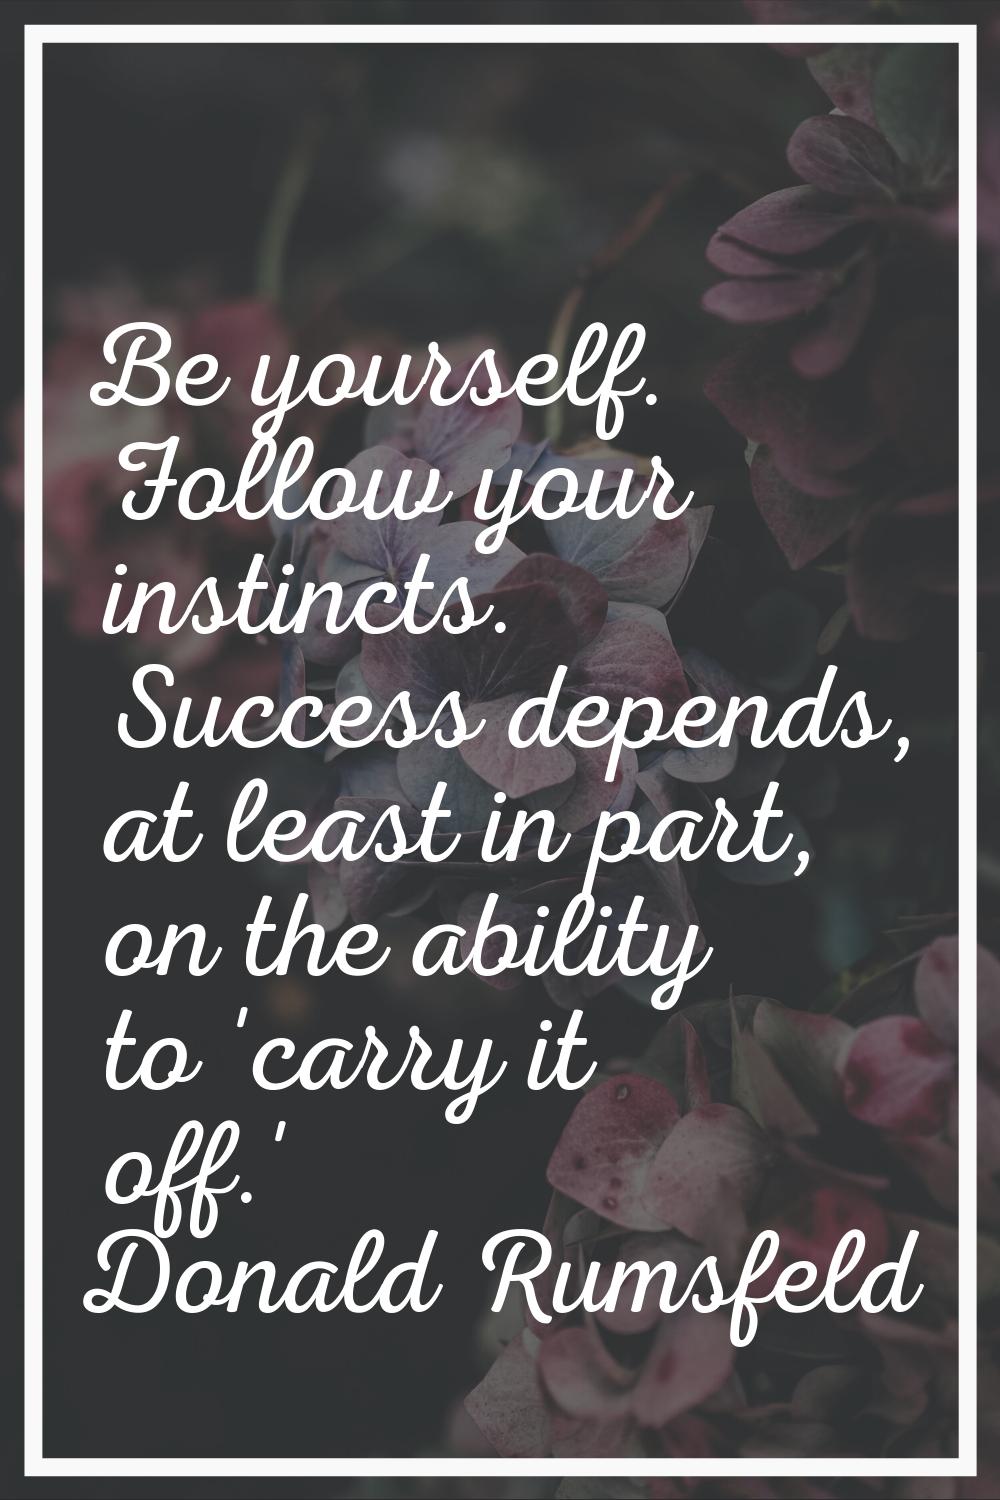 Be yourself. Follow your instincts. Success depends, at least in part, on the ability to 'carry it 